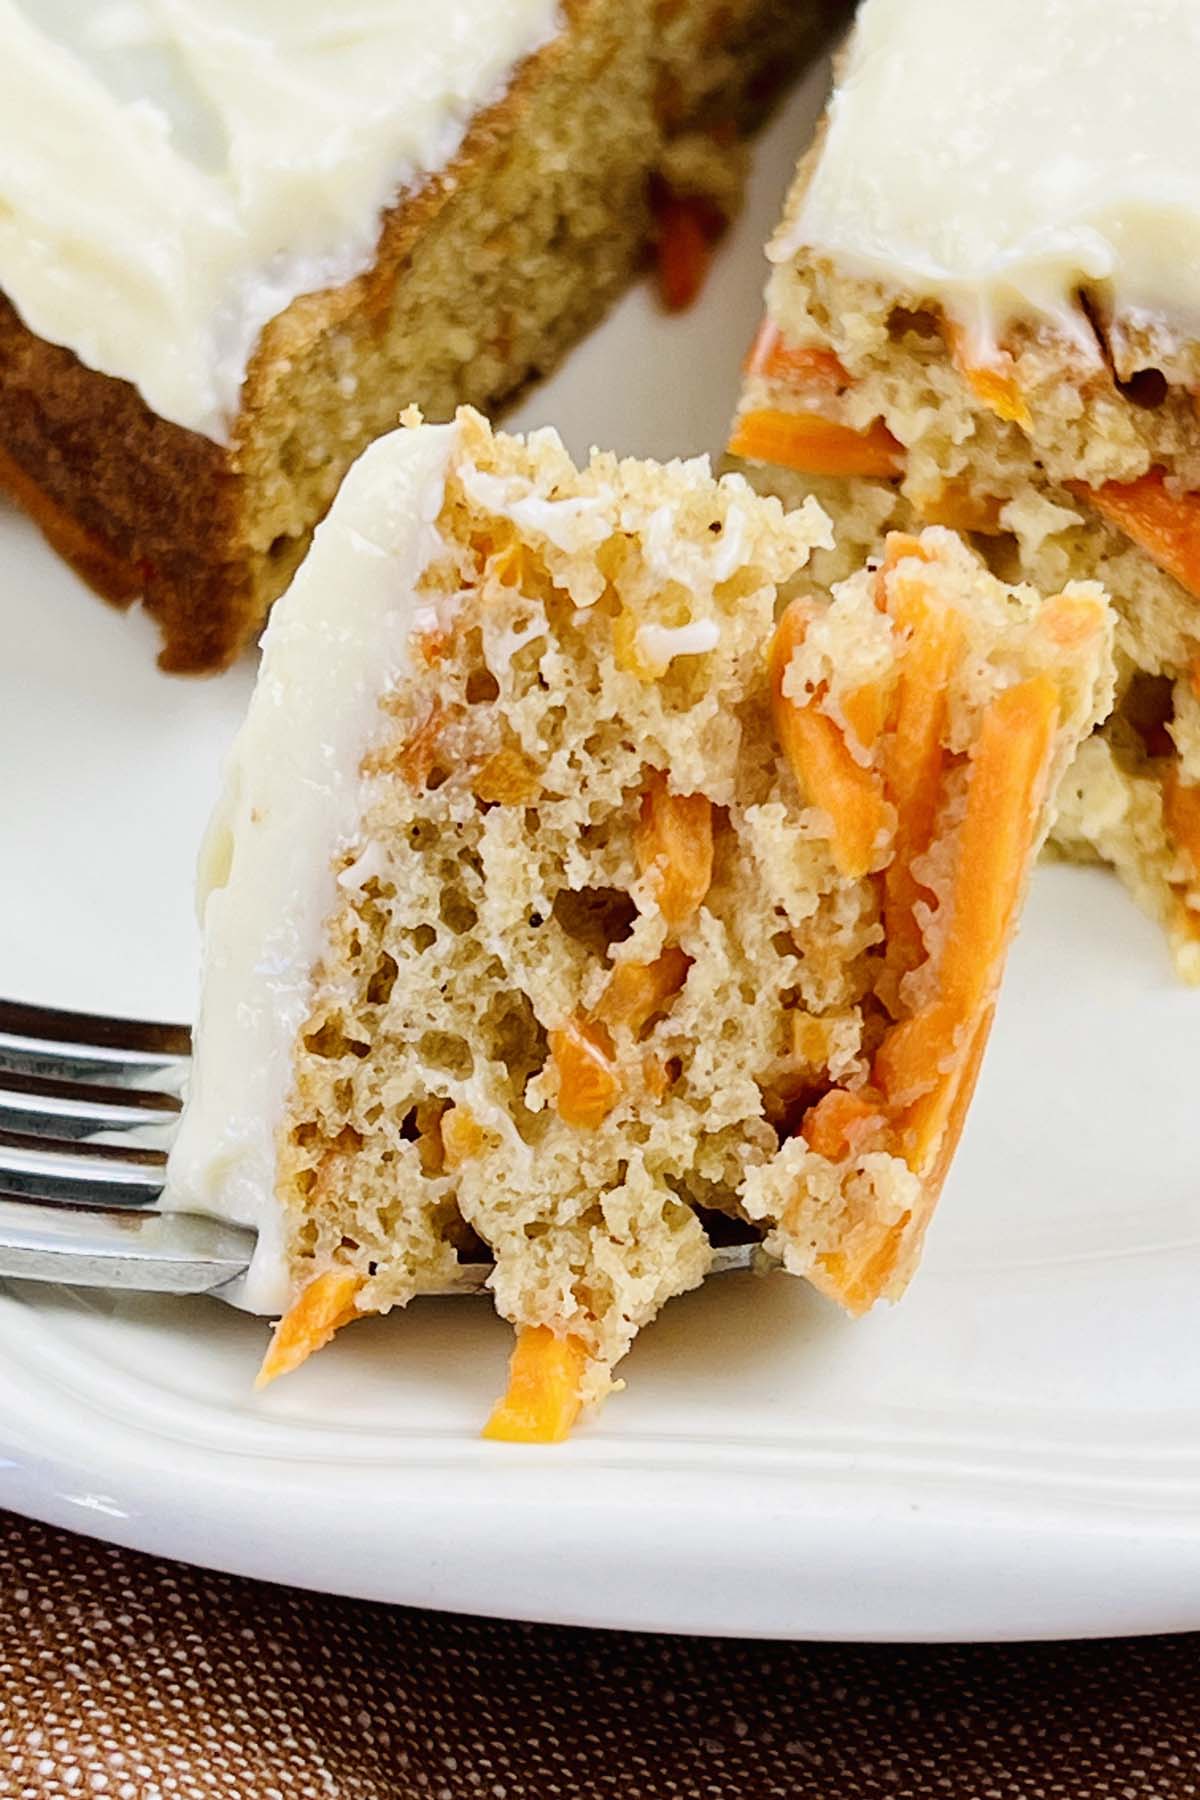 A piece of carrot cake on a fork.